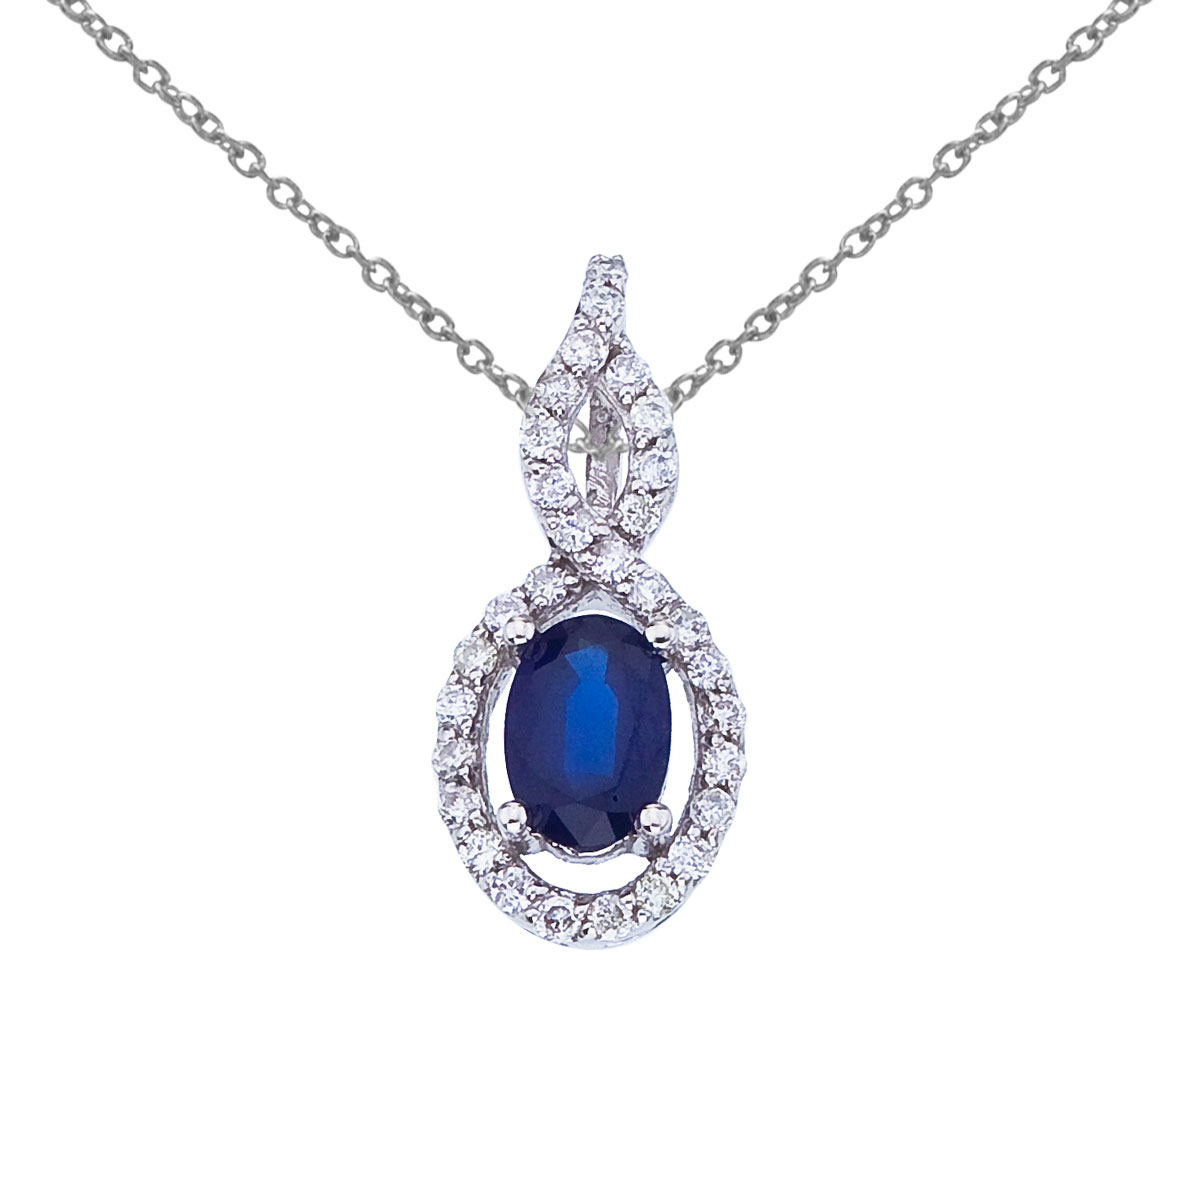 Luminous 6x4 mm sapphire pendant surrounded by .18 total ct diamonds set in 14k white gold.